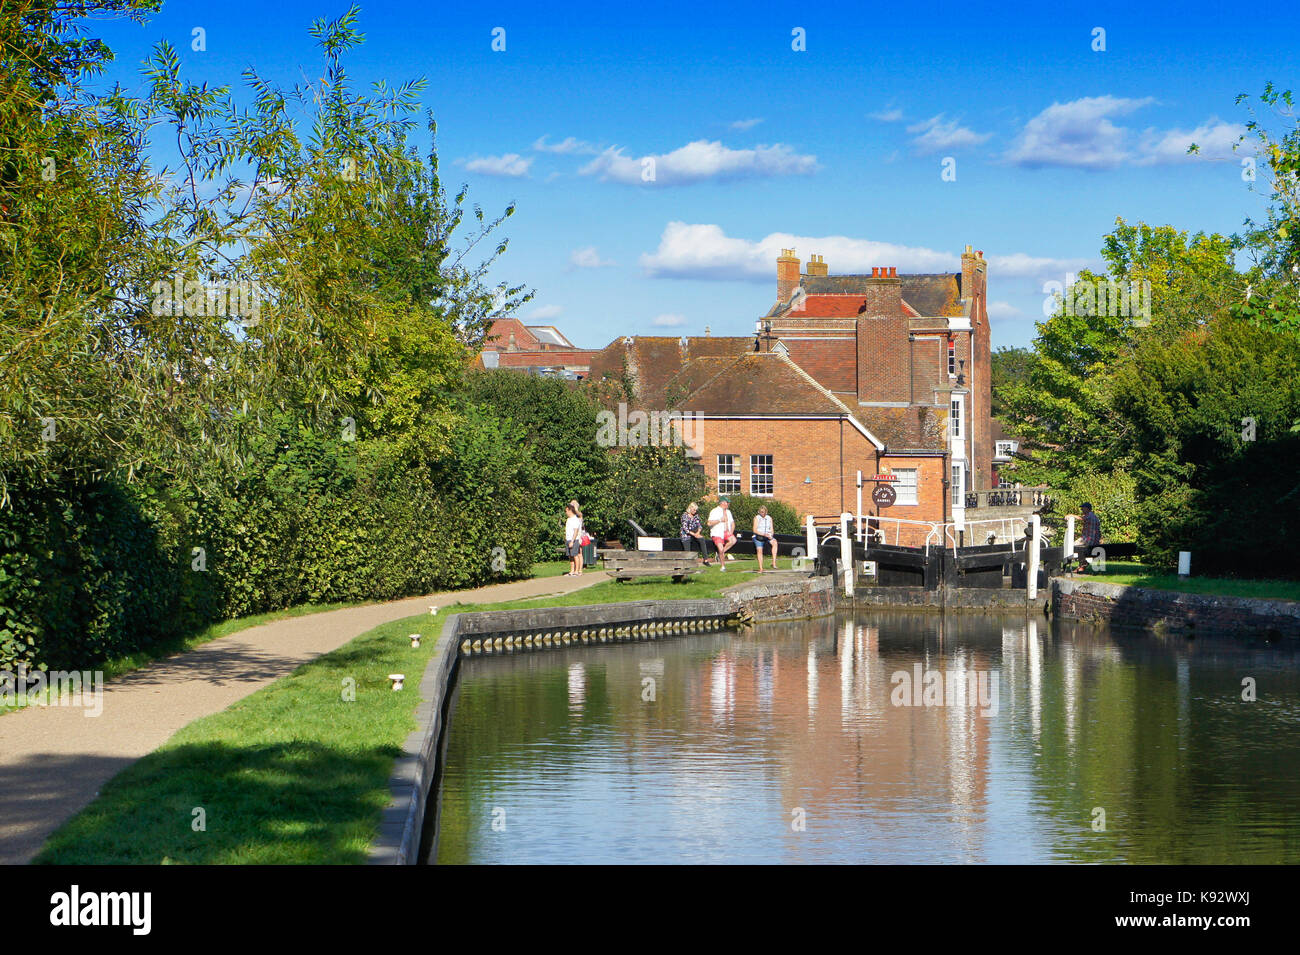 Newbury, UK - August 27 2017:  Peope relaxing by a lock on the canal in Newbury on a summer day Stock Photo